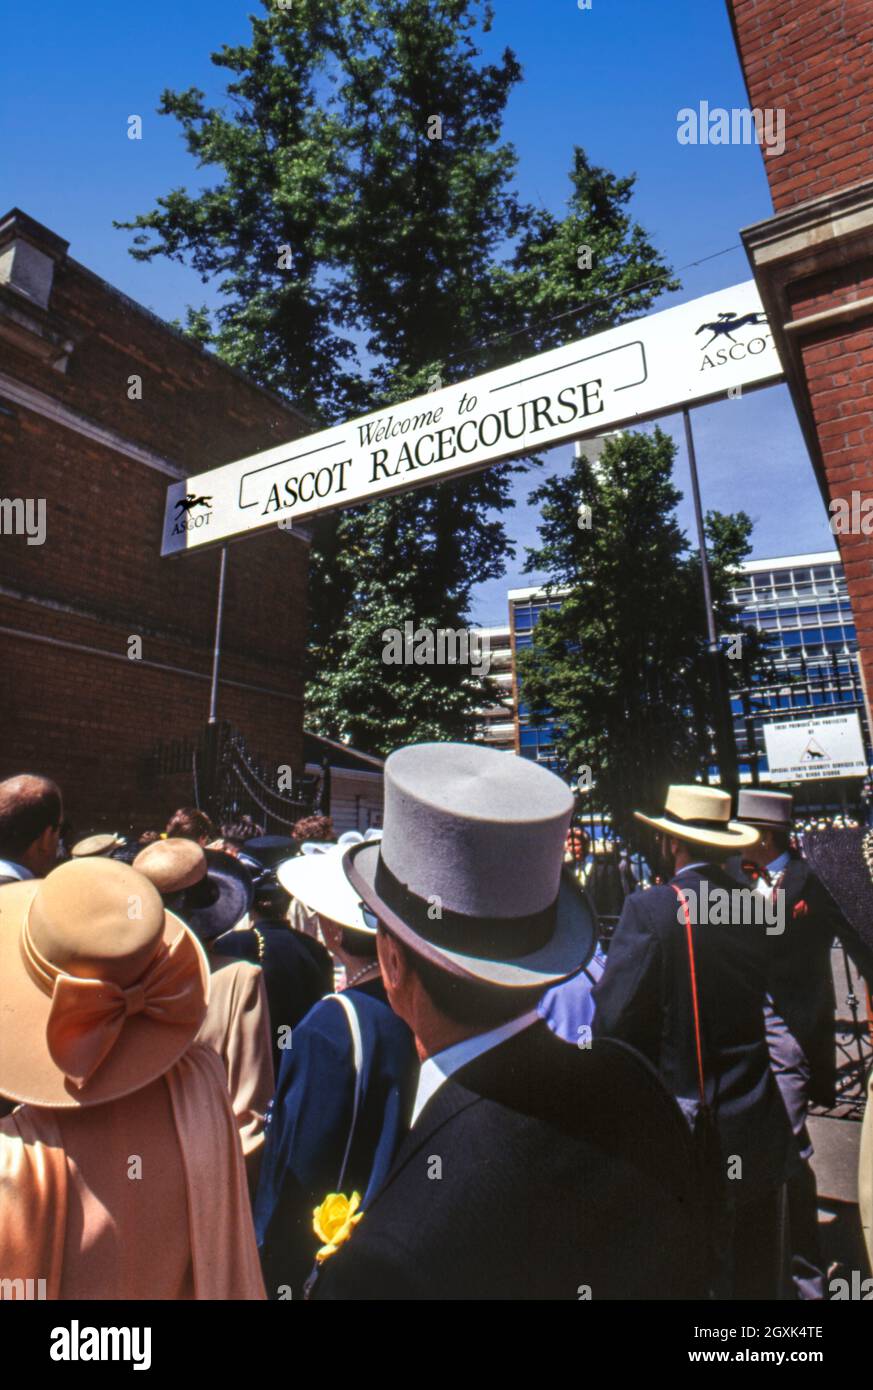 1990s Ladies Day at Royal Ascot. Racegoers walking into the 1980s architecture Ascot Racecourse entrance wearing the fashion and styles of the day Stock Photo